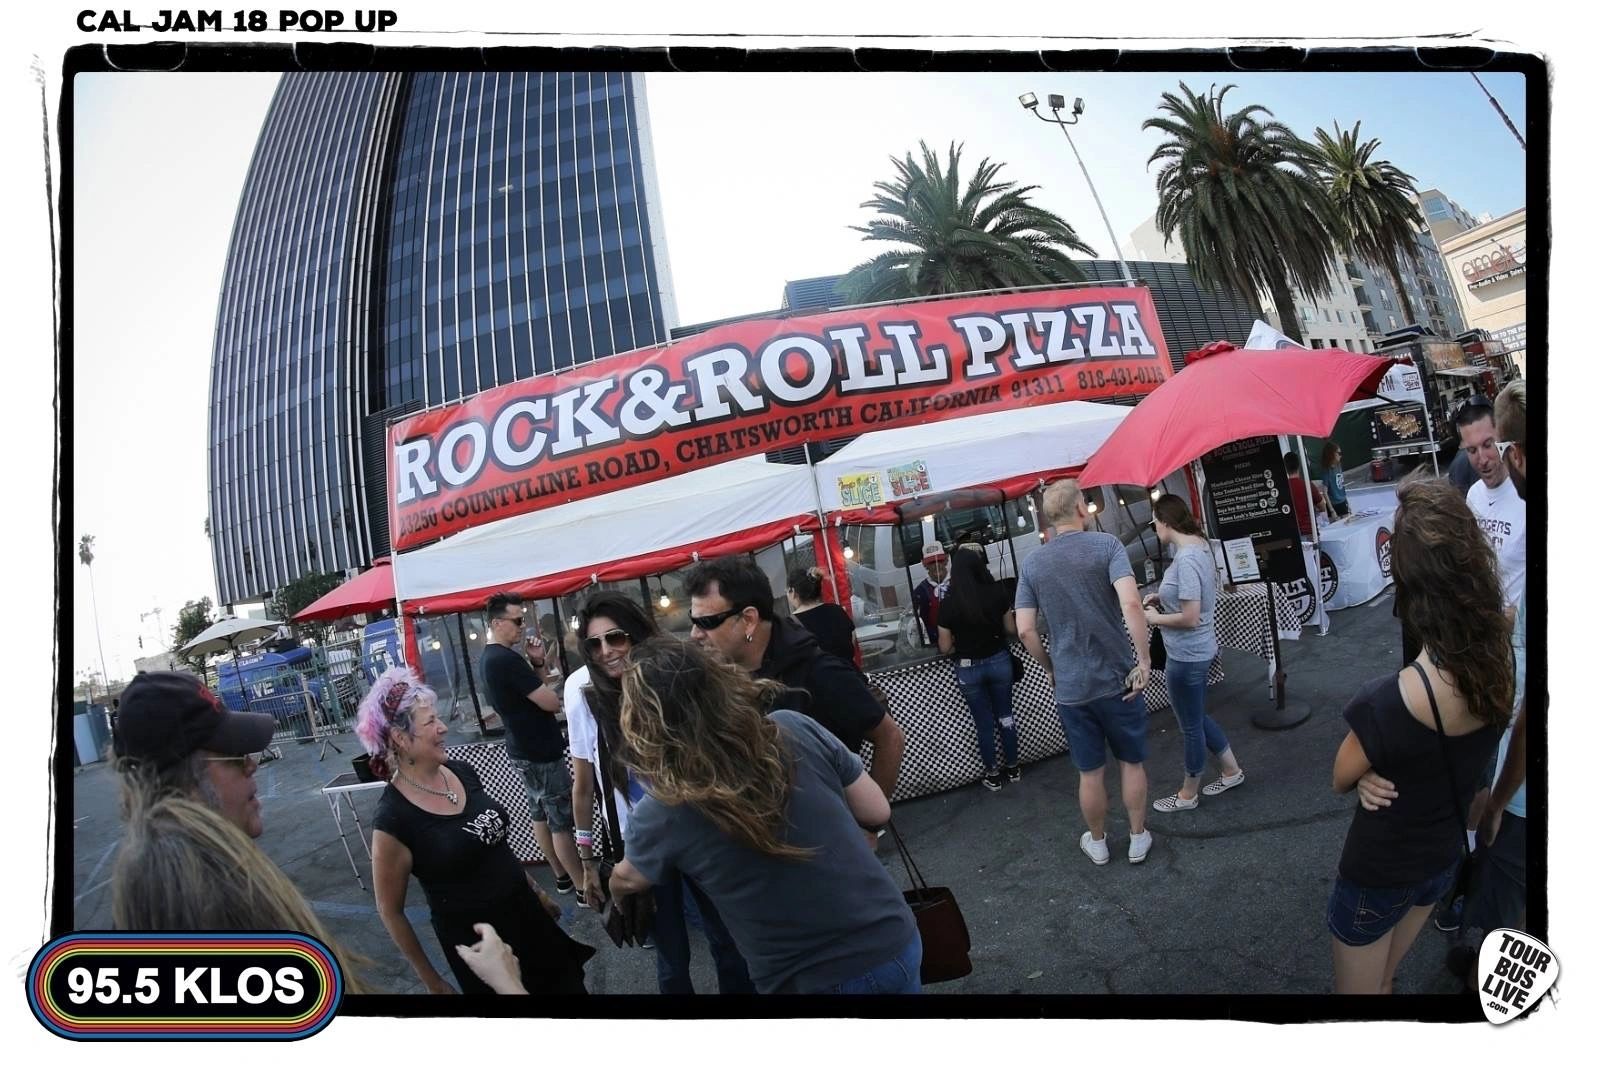 Photo of Rock & Roll Pizza catering event showing people in front of our mobile pizza kitchen.